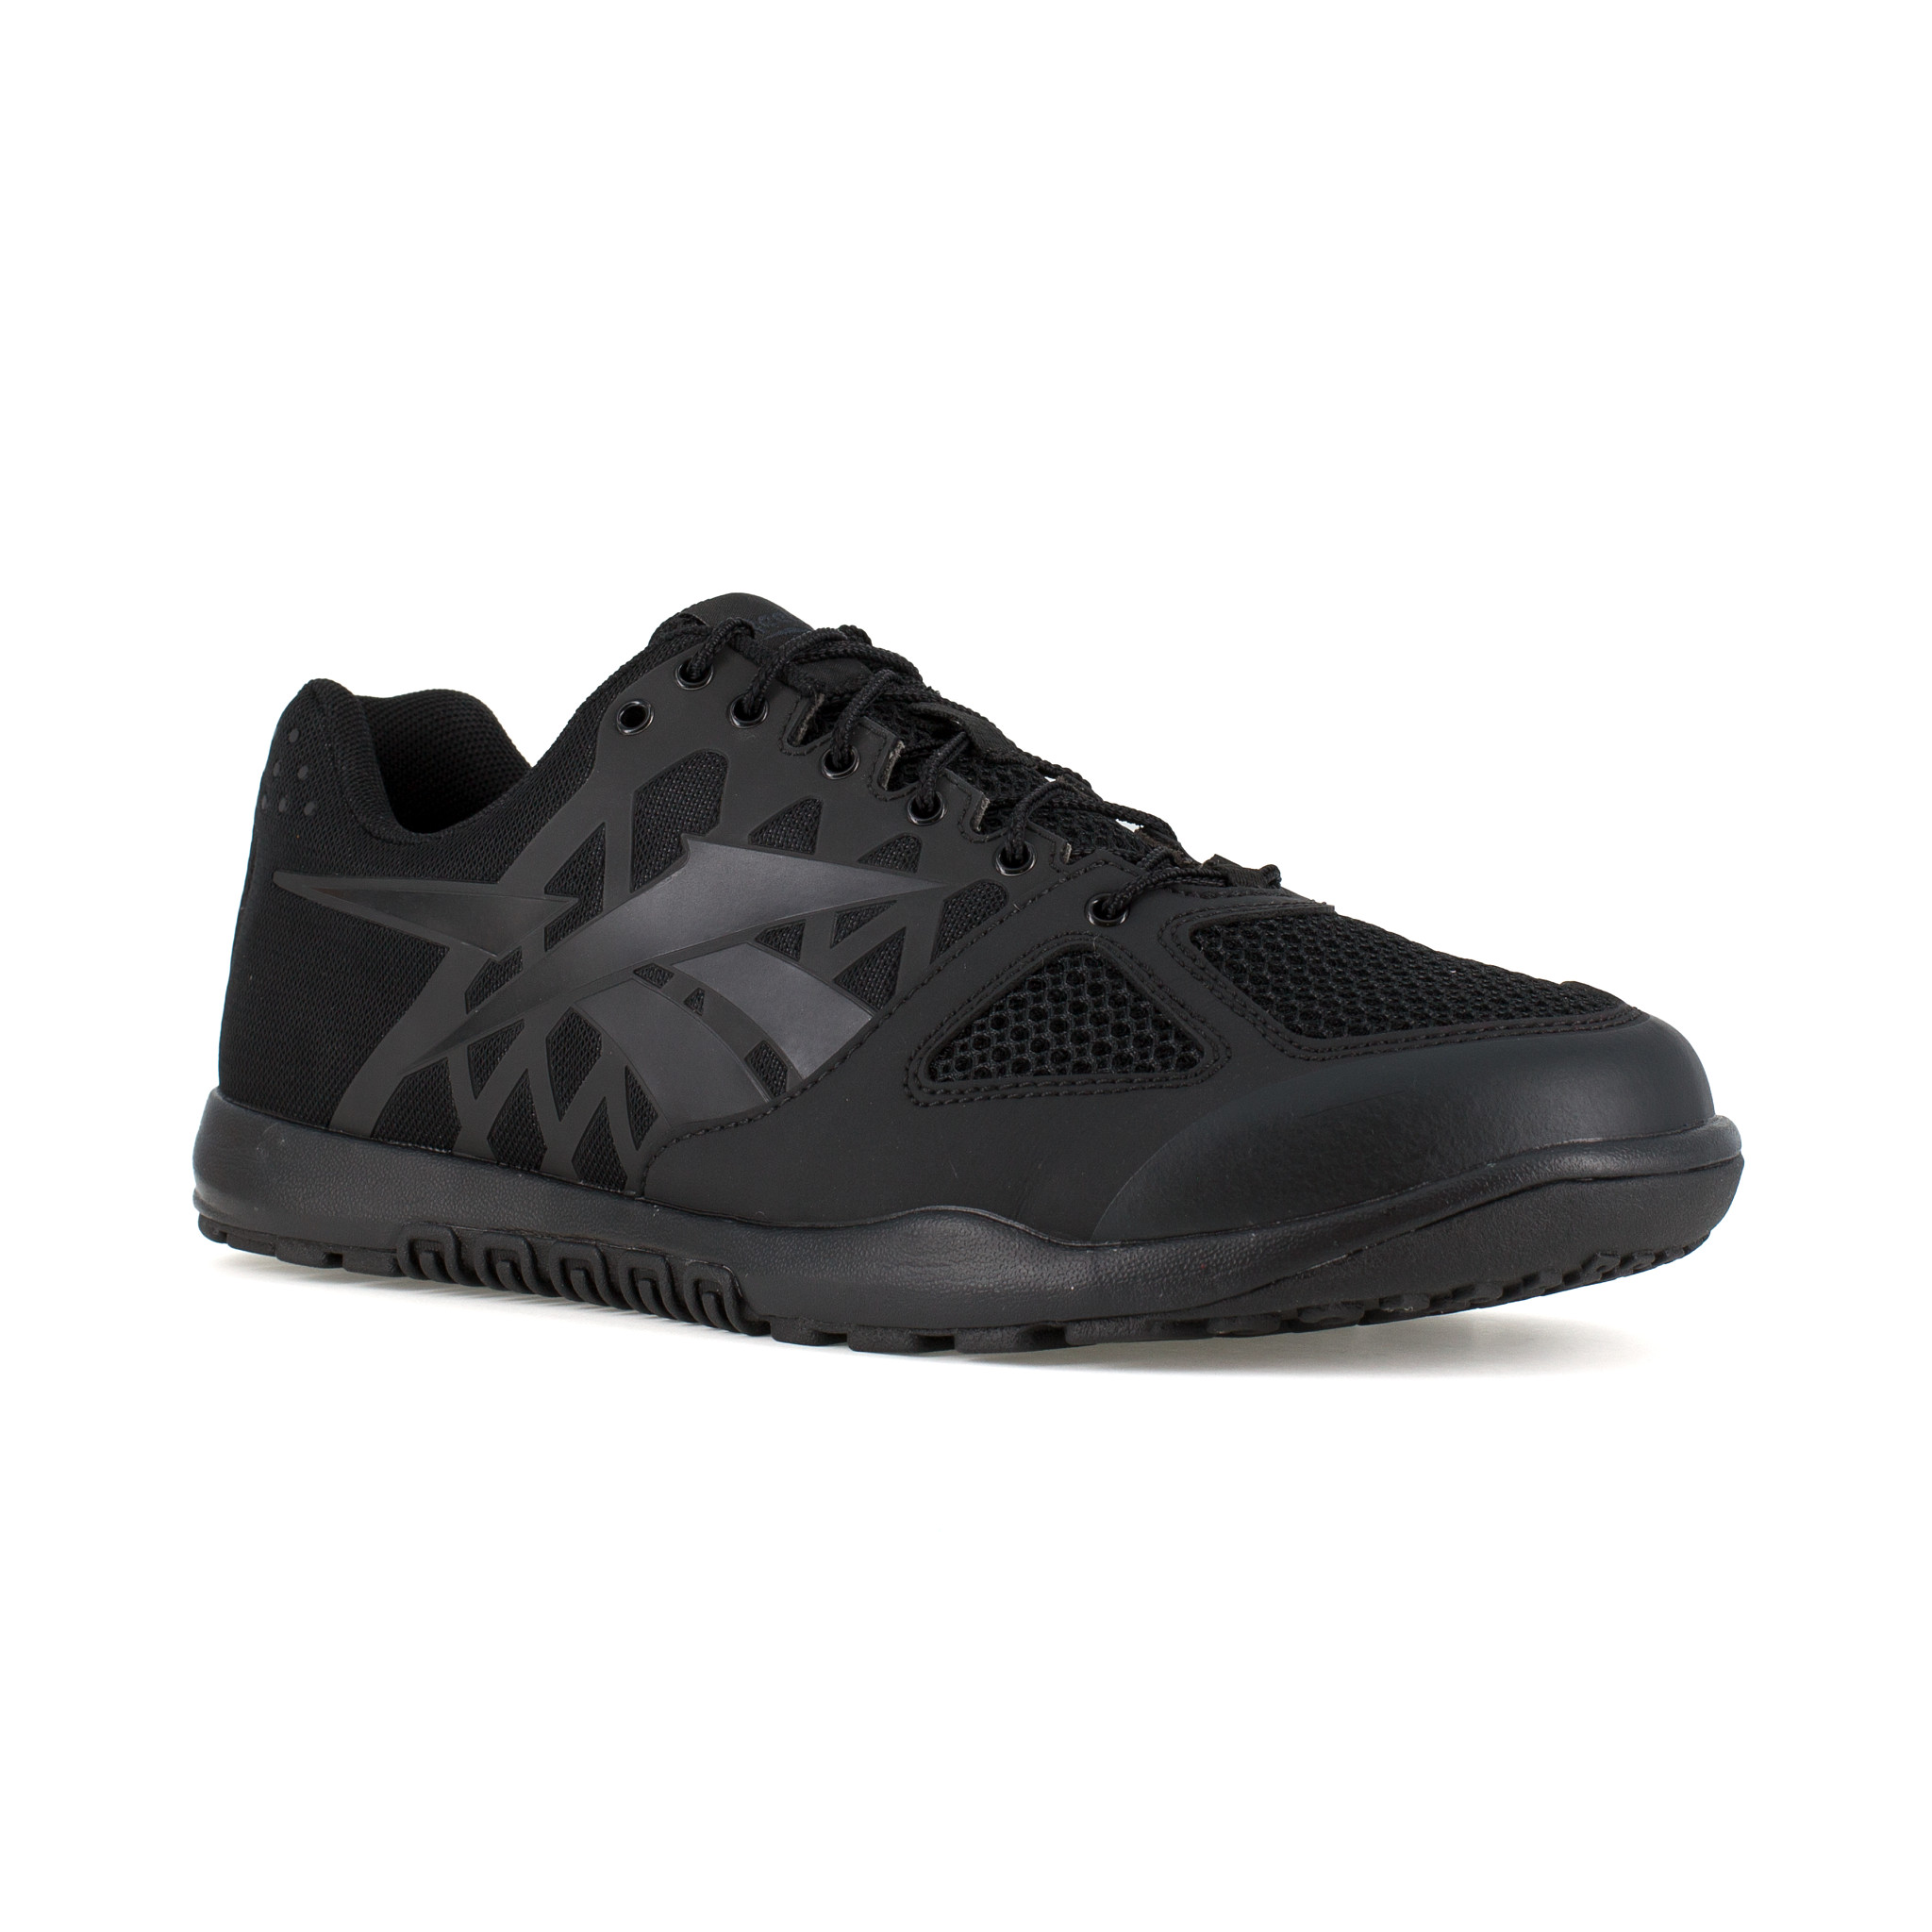 Reebok revolutionizes tactical footwear with Nano Tactical Series